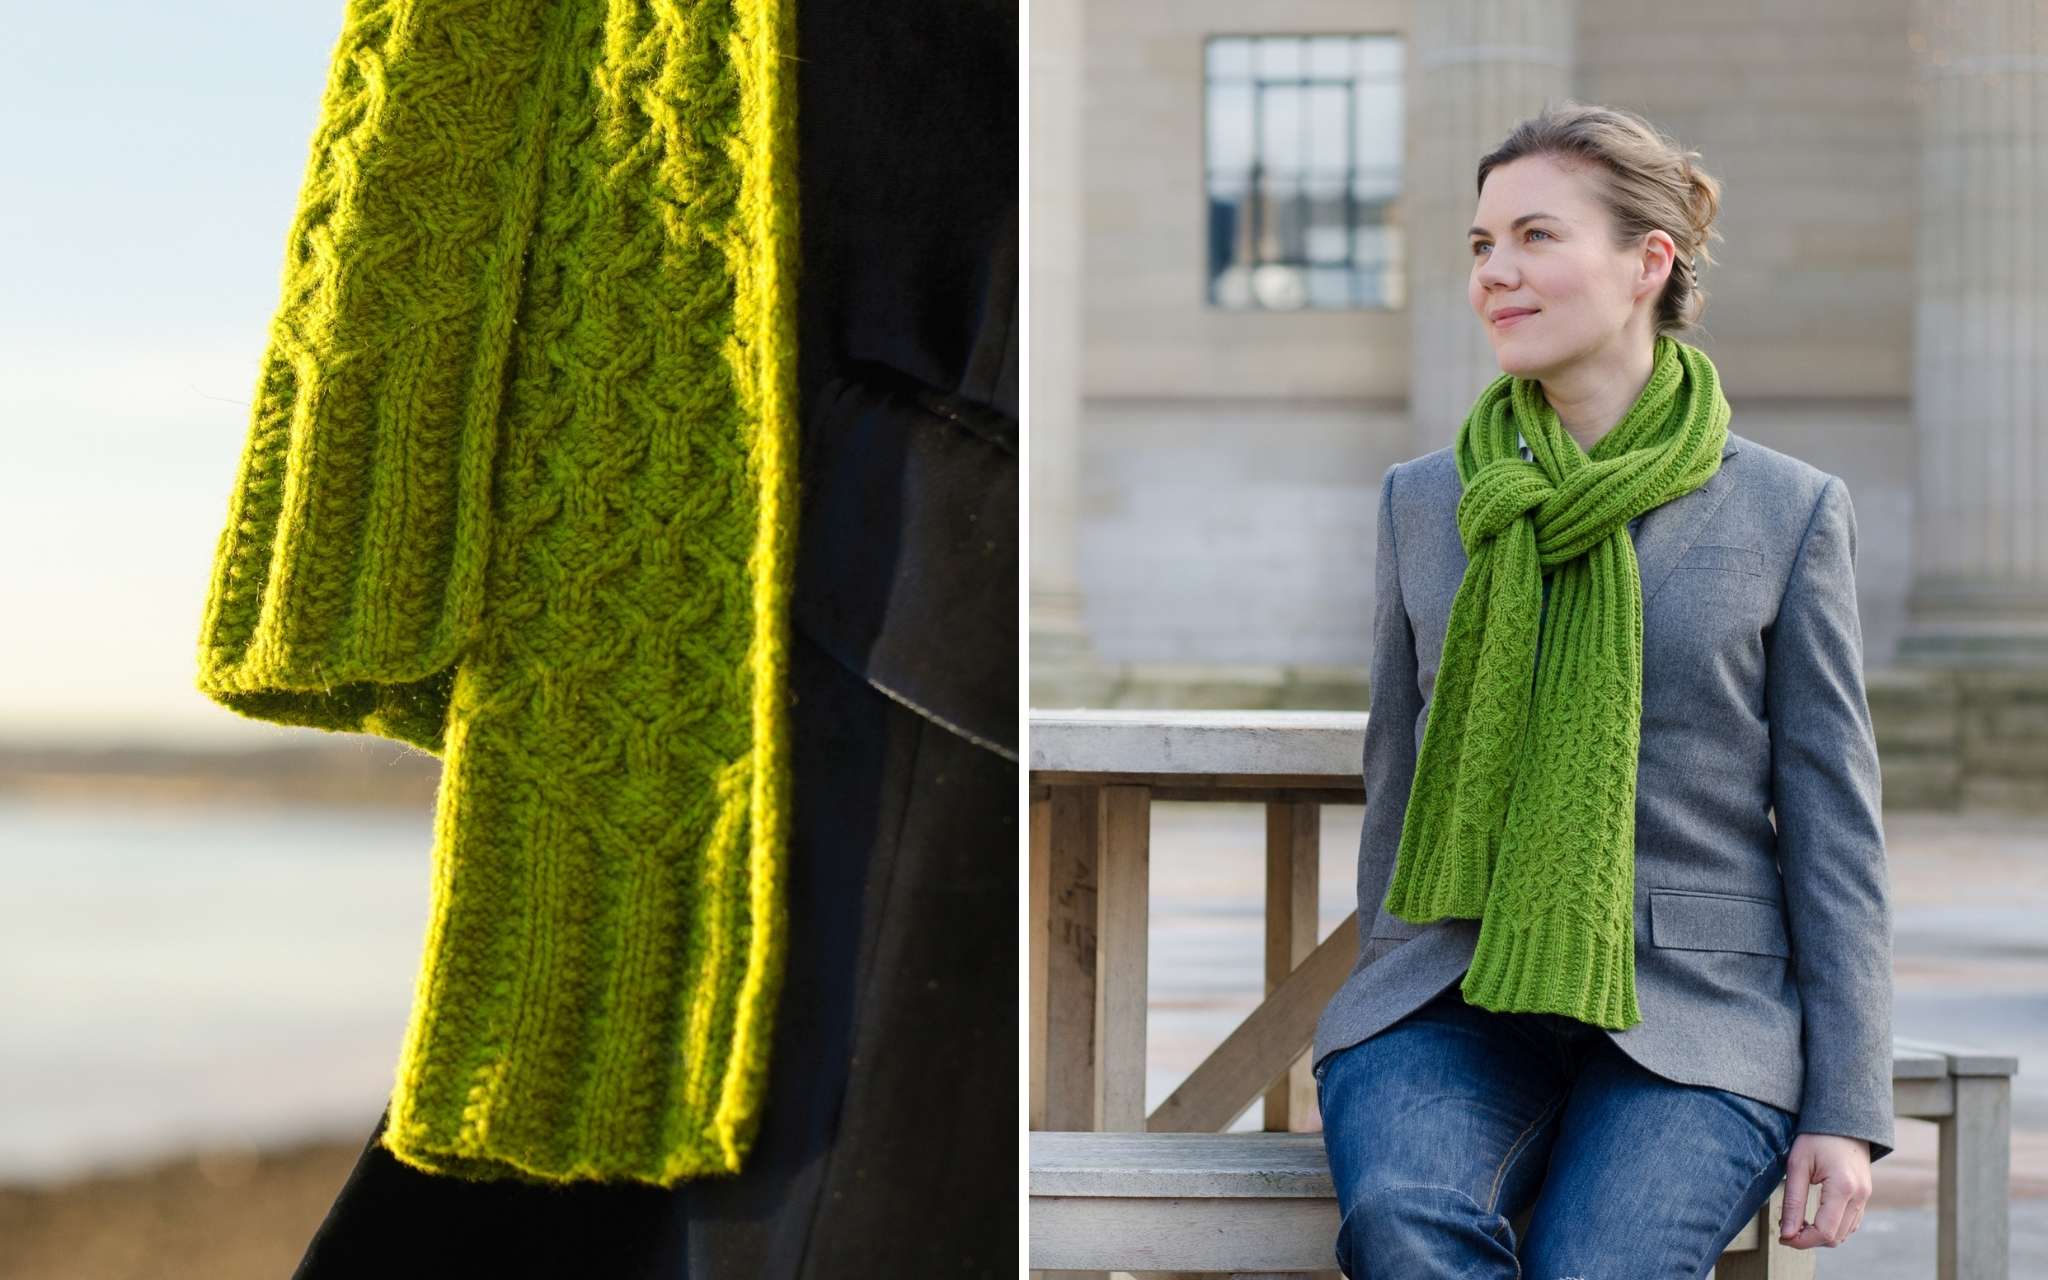 two photos of a white woman wearing a blazer and a green cabled scarf. The scarf has a textured rib pattern with a geometric cable pattern at both ends